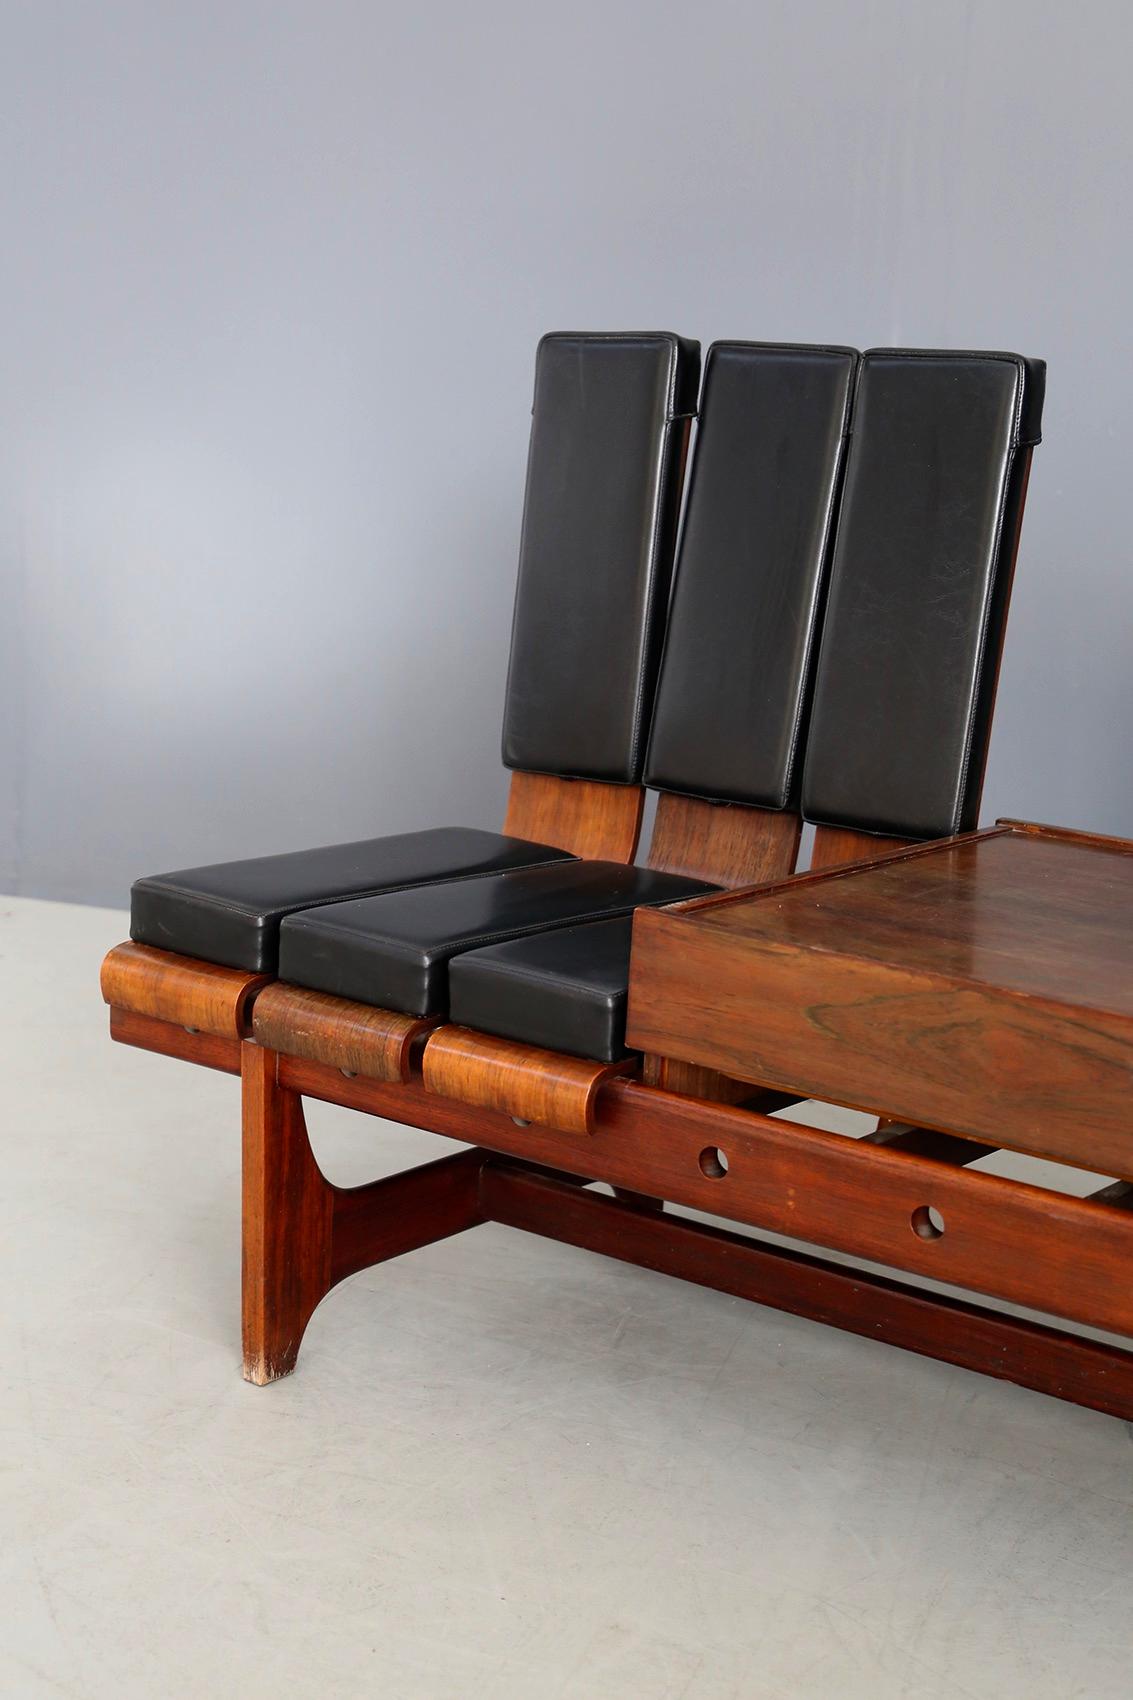 Modular bench by Barovero Torino in rosewood and black leather. Midcentury bench made by Barovero Torino in 1955. The bench is modular with a dark veined rosewood drawer. The seat is striped in black leatherette. The peculiarity of the bench is its